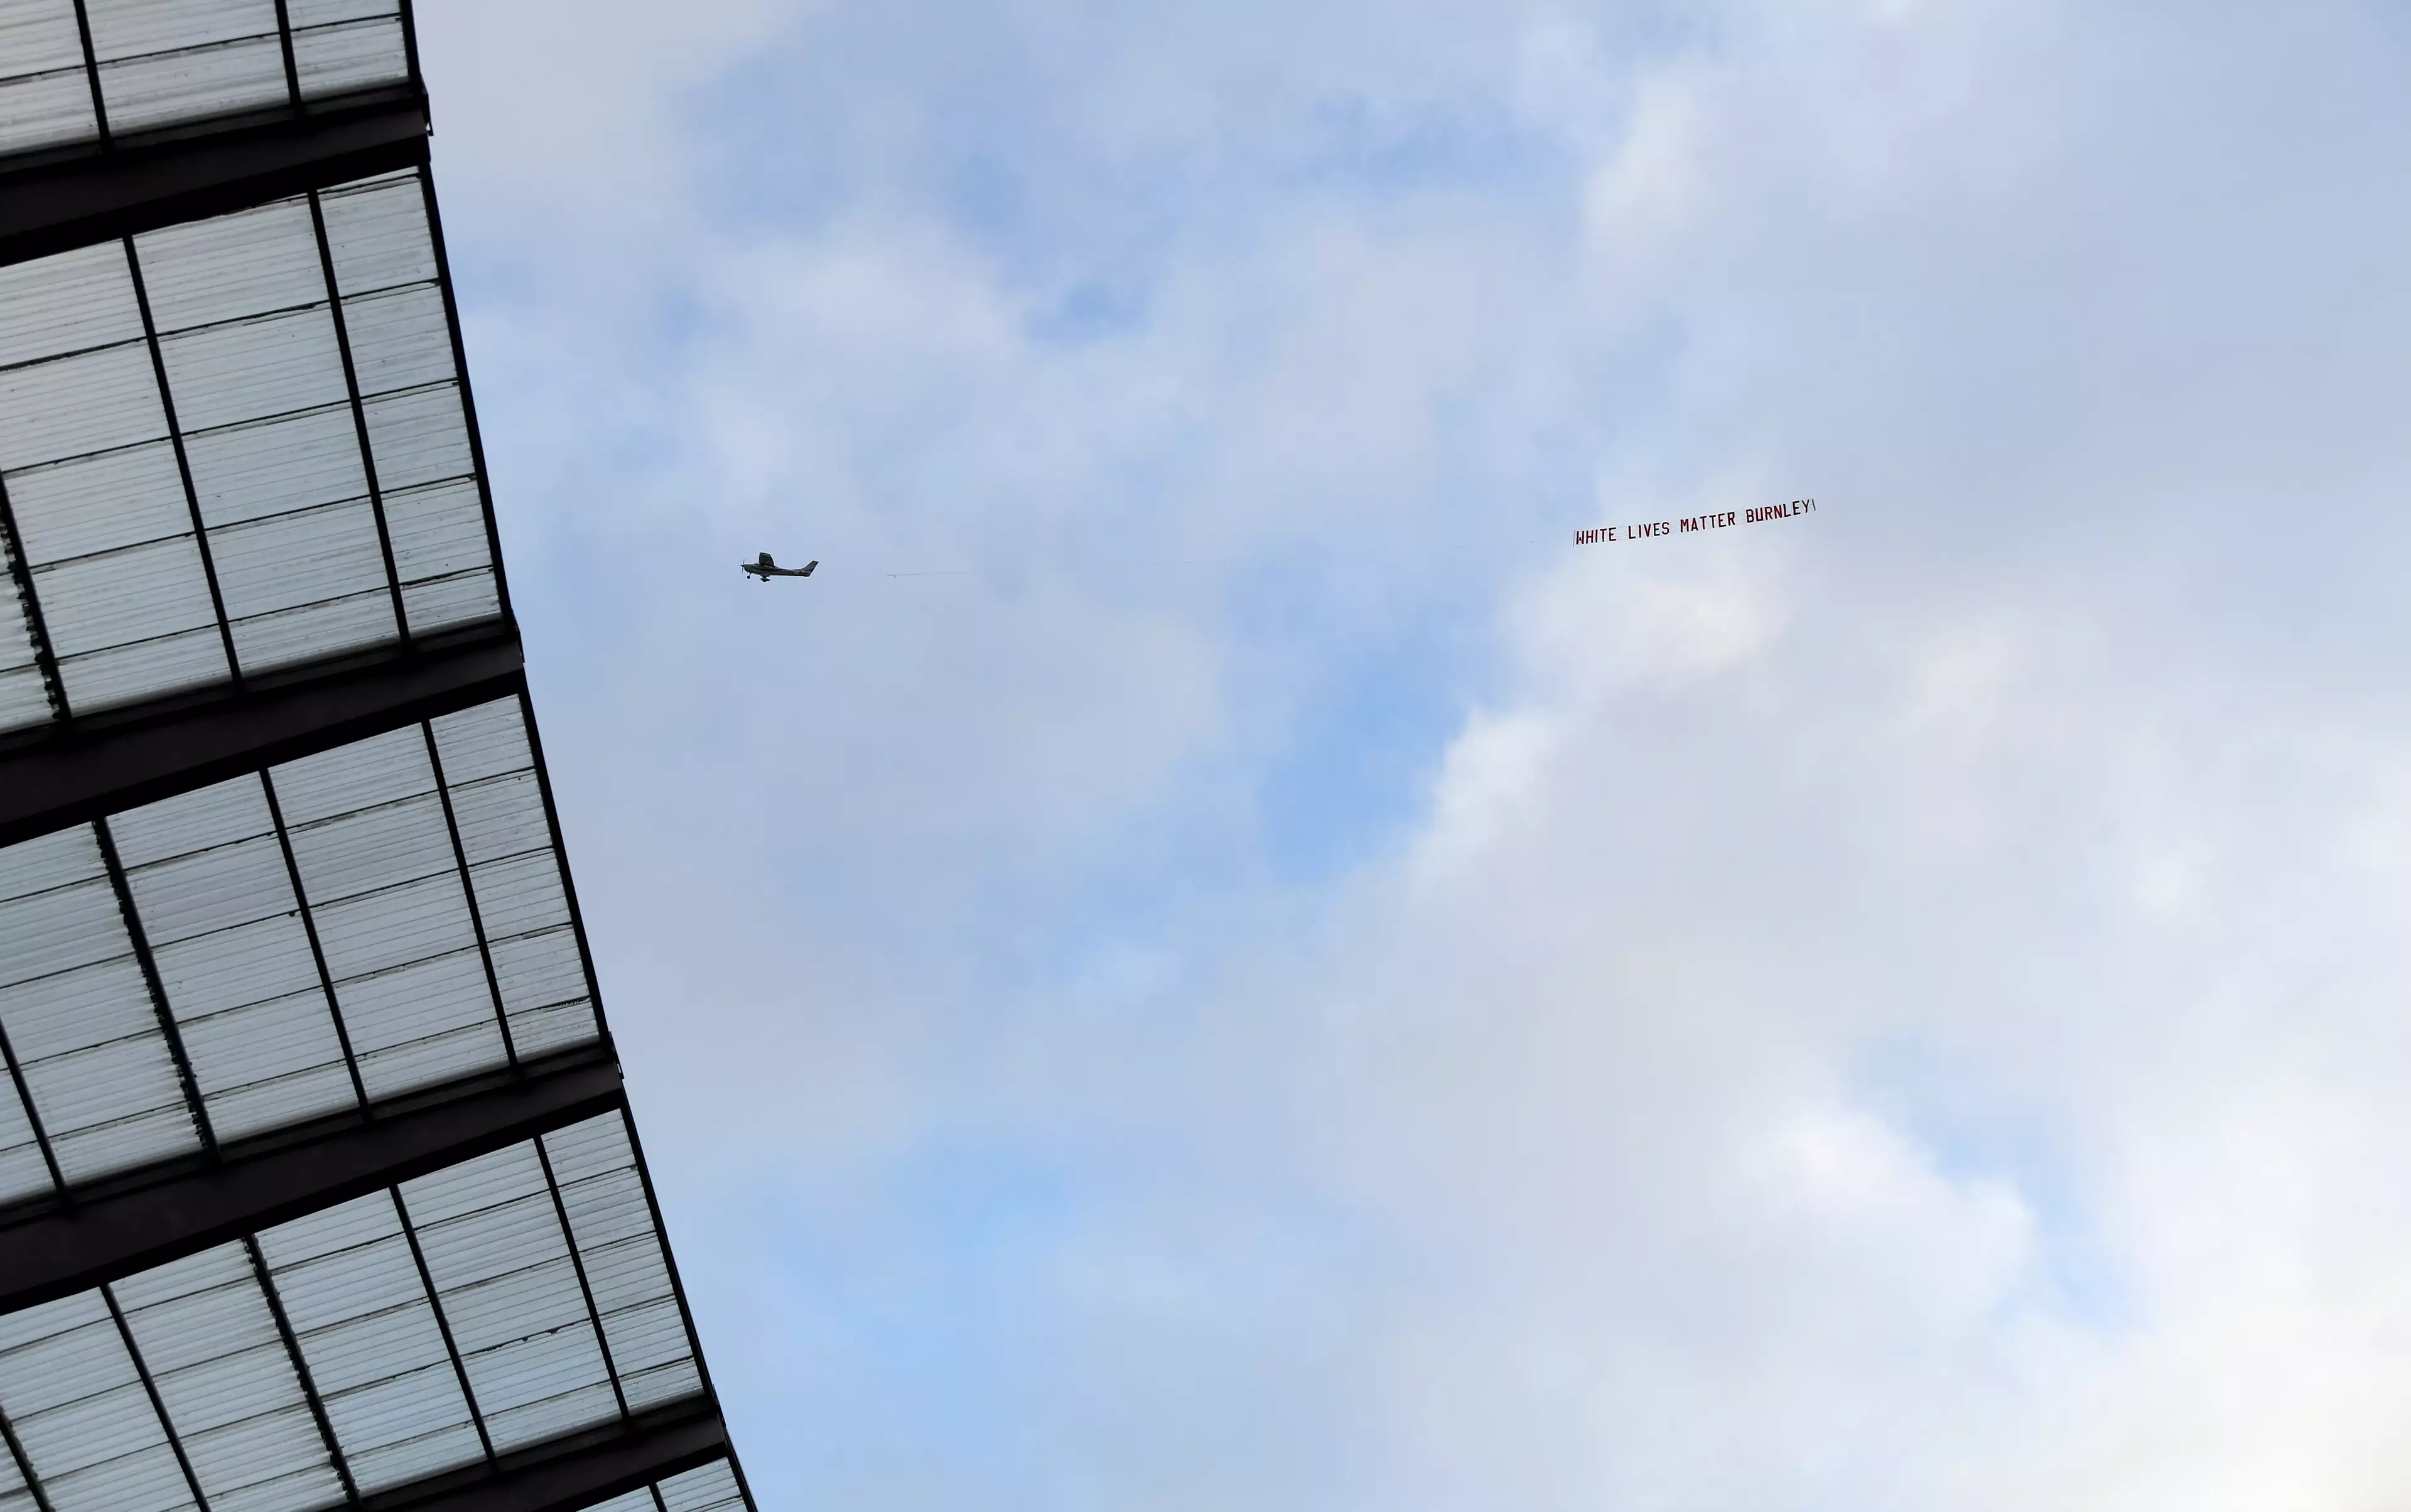 The plane flew over just before kick-off.